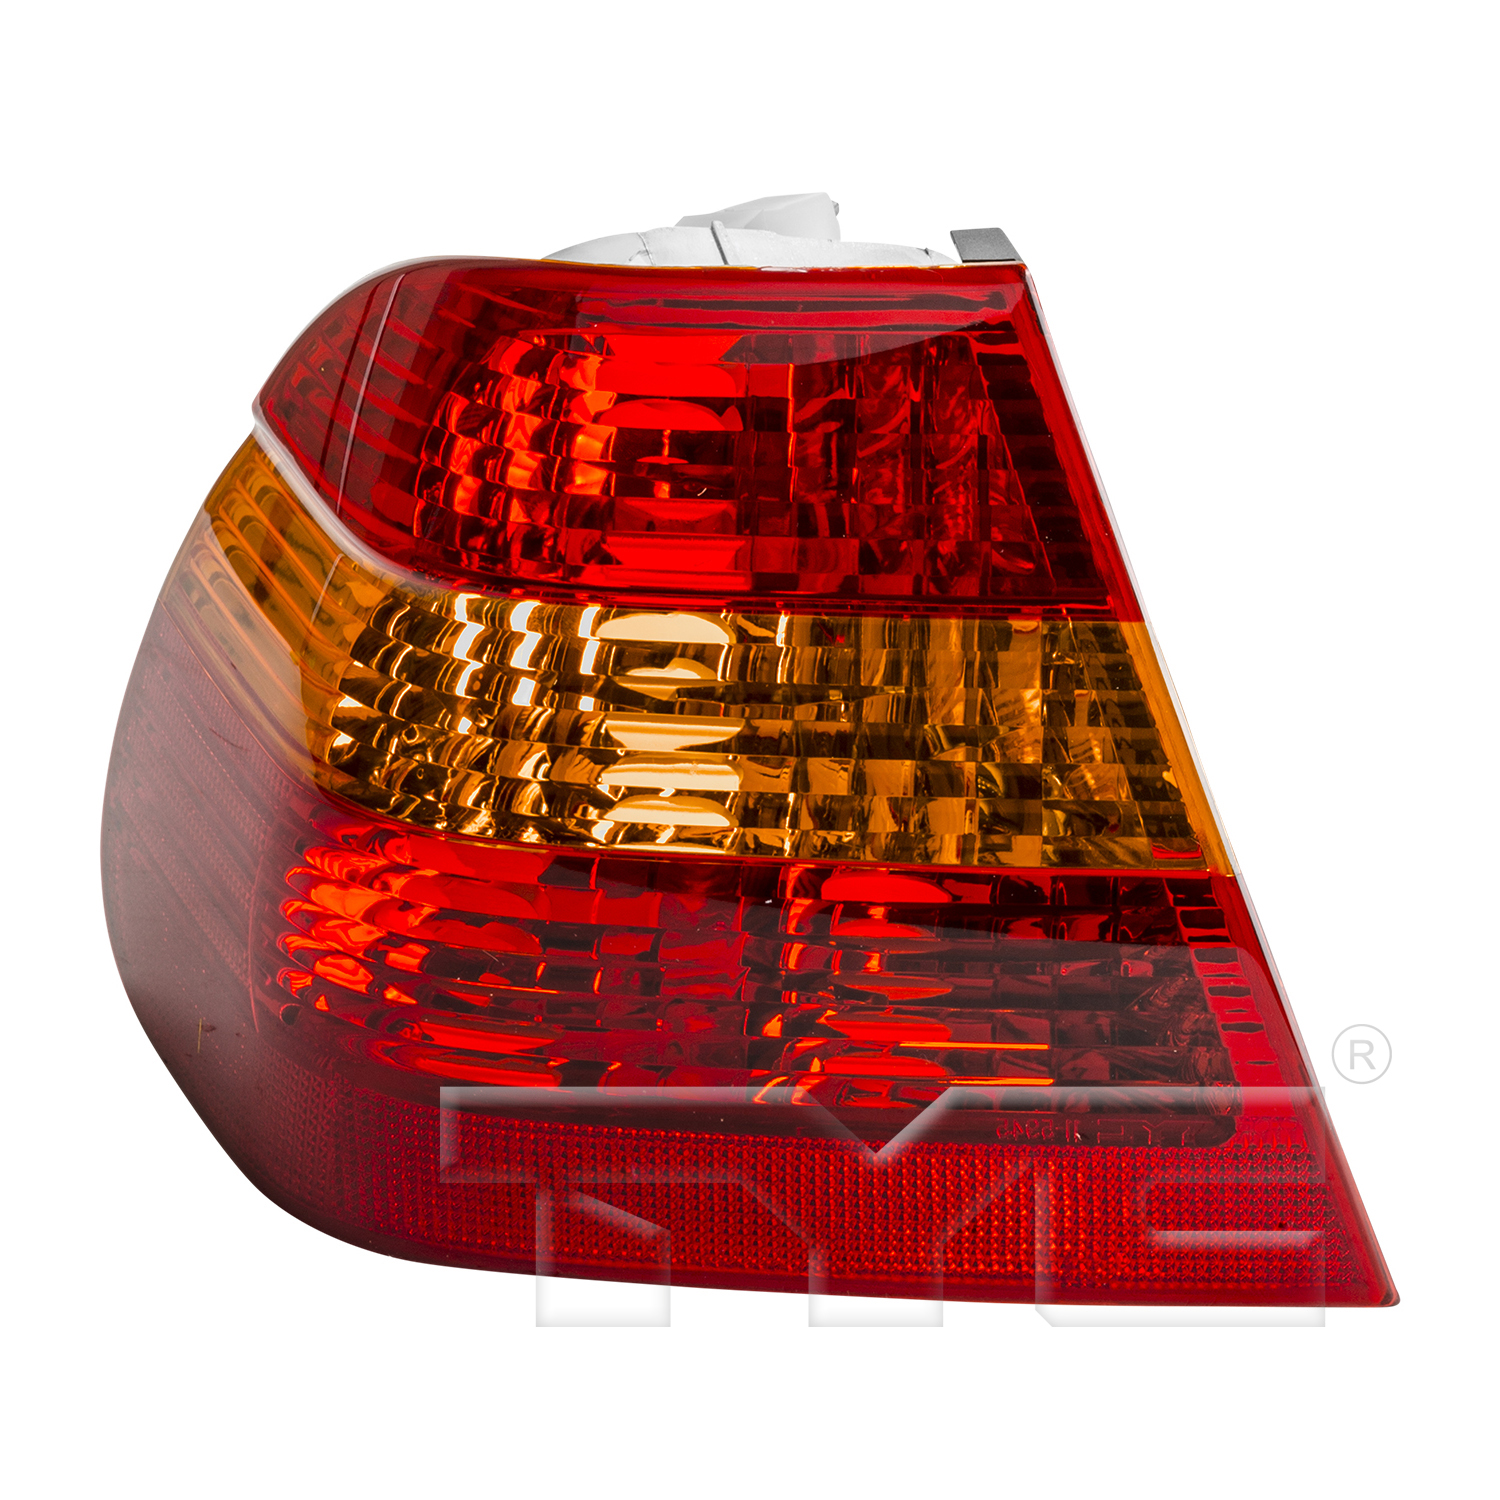 Aftermarket TAILLIGHTS for BMW - 330I, 330i,02-05,LT Taillamp assy